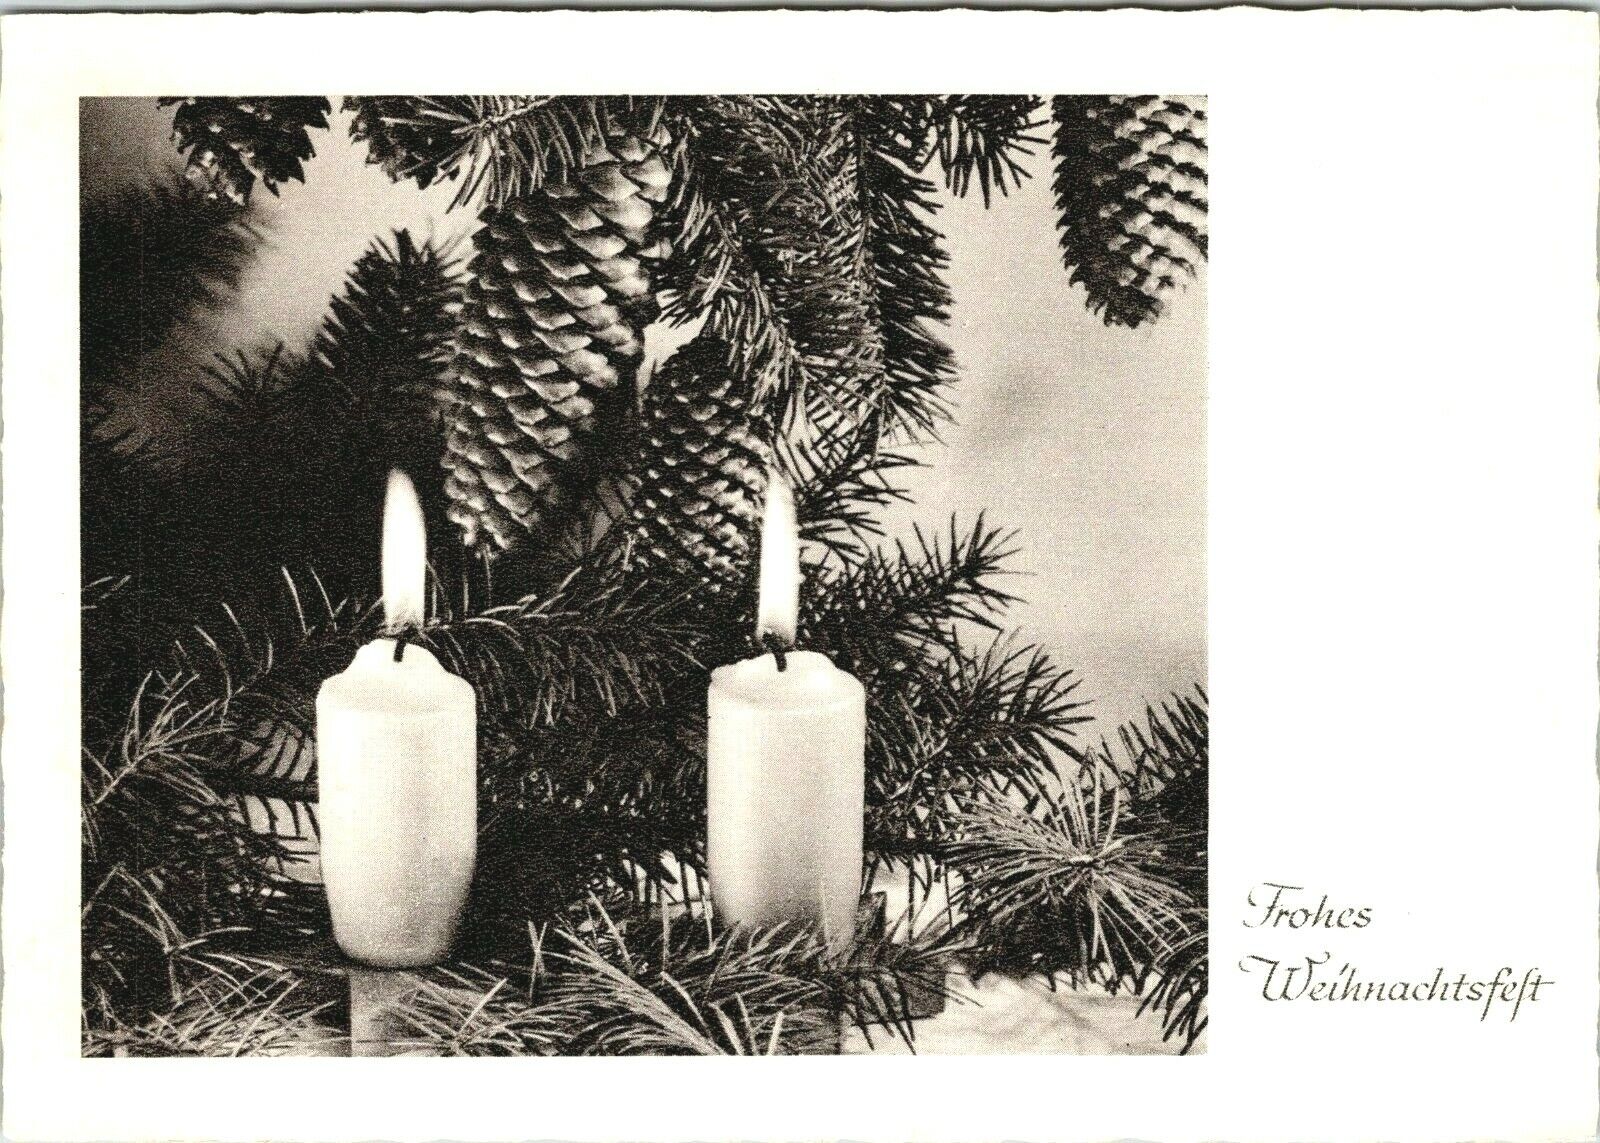 Vtg German Postcard Frohes Weihnachtsfelt (Merry Christmas) candles pinecone  